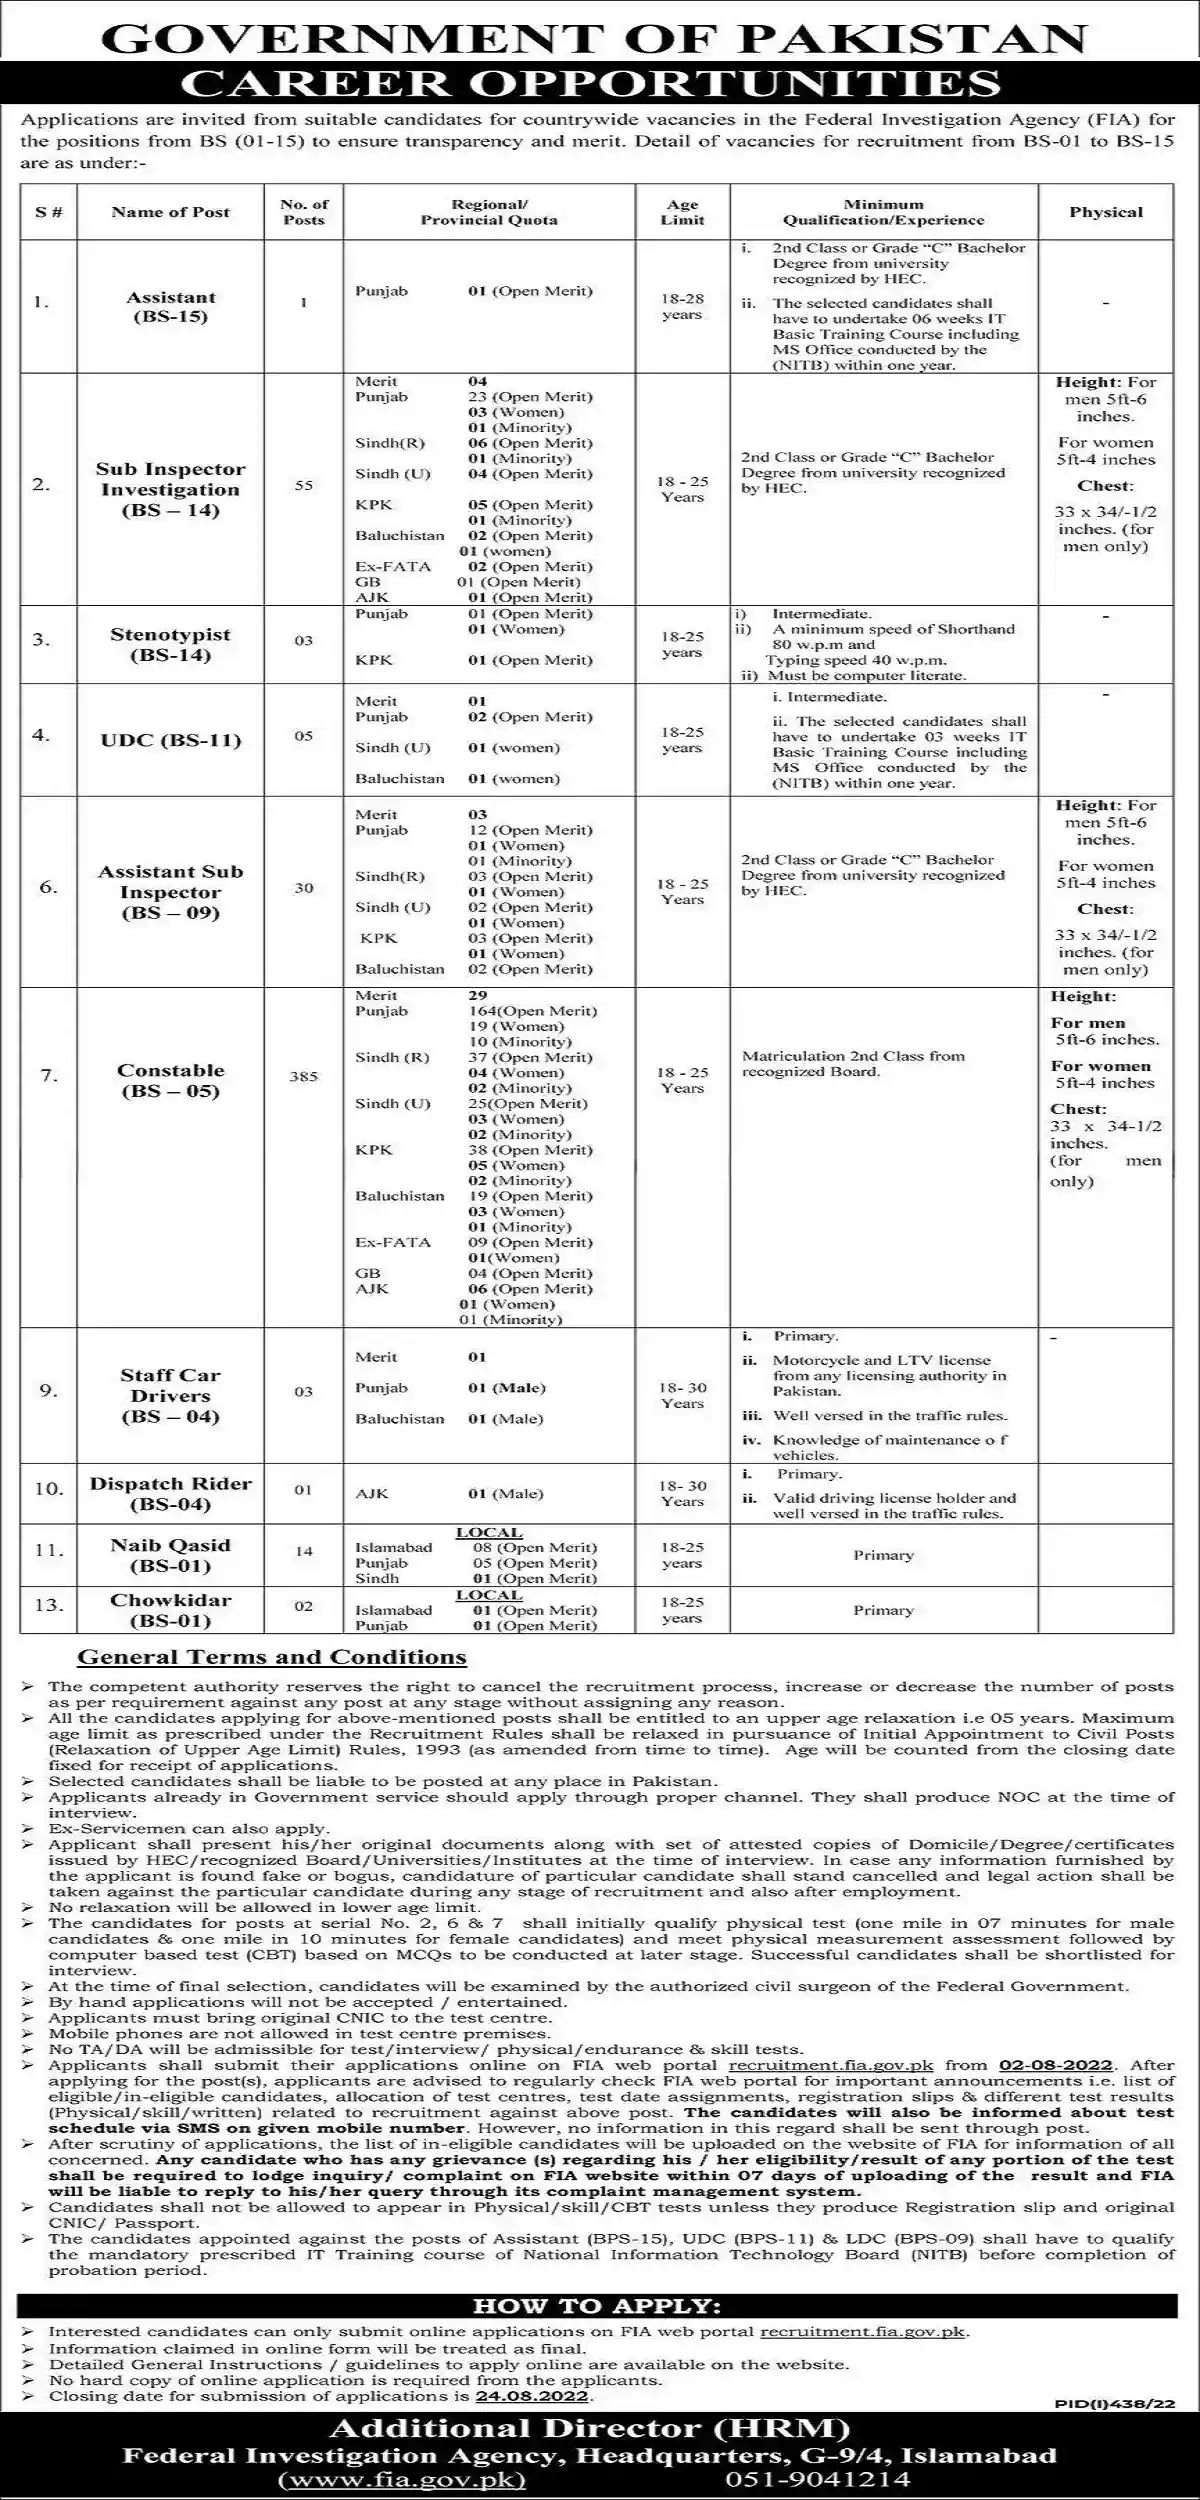 FIA Federal Investigation Authority Jobs for Assistant, Sub Inspector, etc. in July 2022 | Apply Online